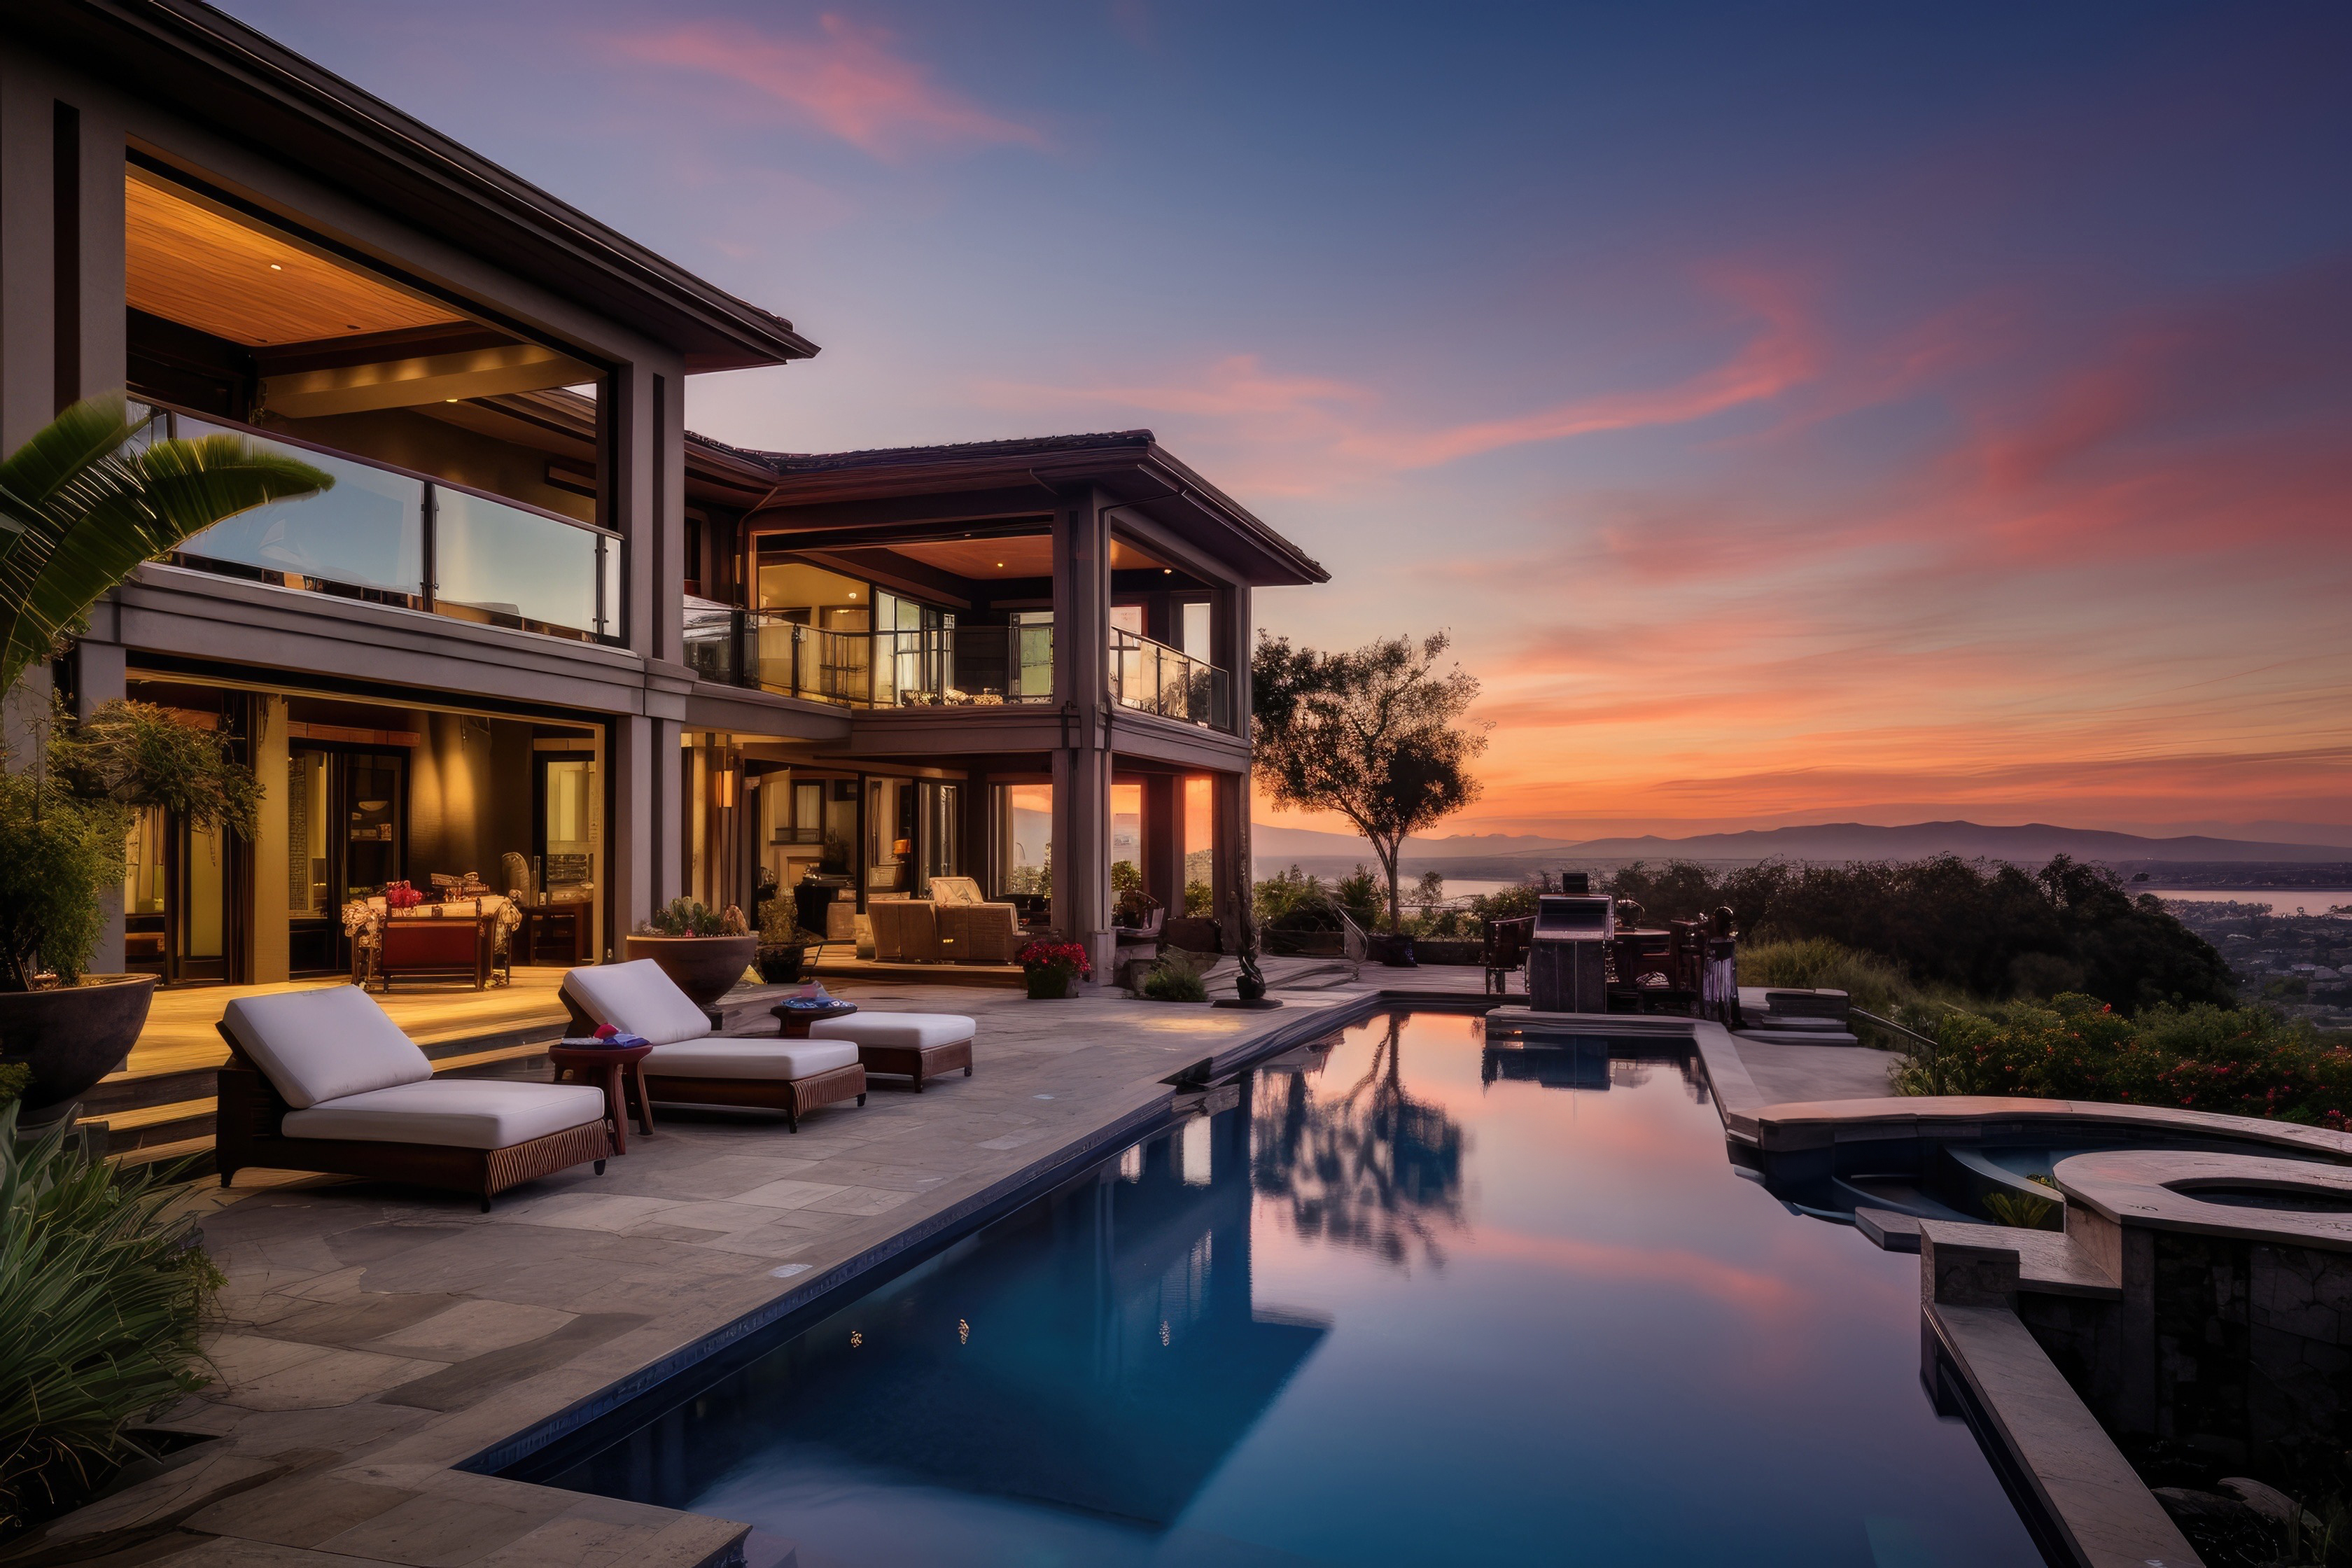 Gorgeous upscale residence featuring a pool and stunning sunset views.